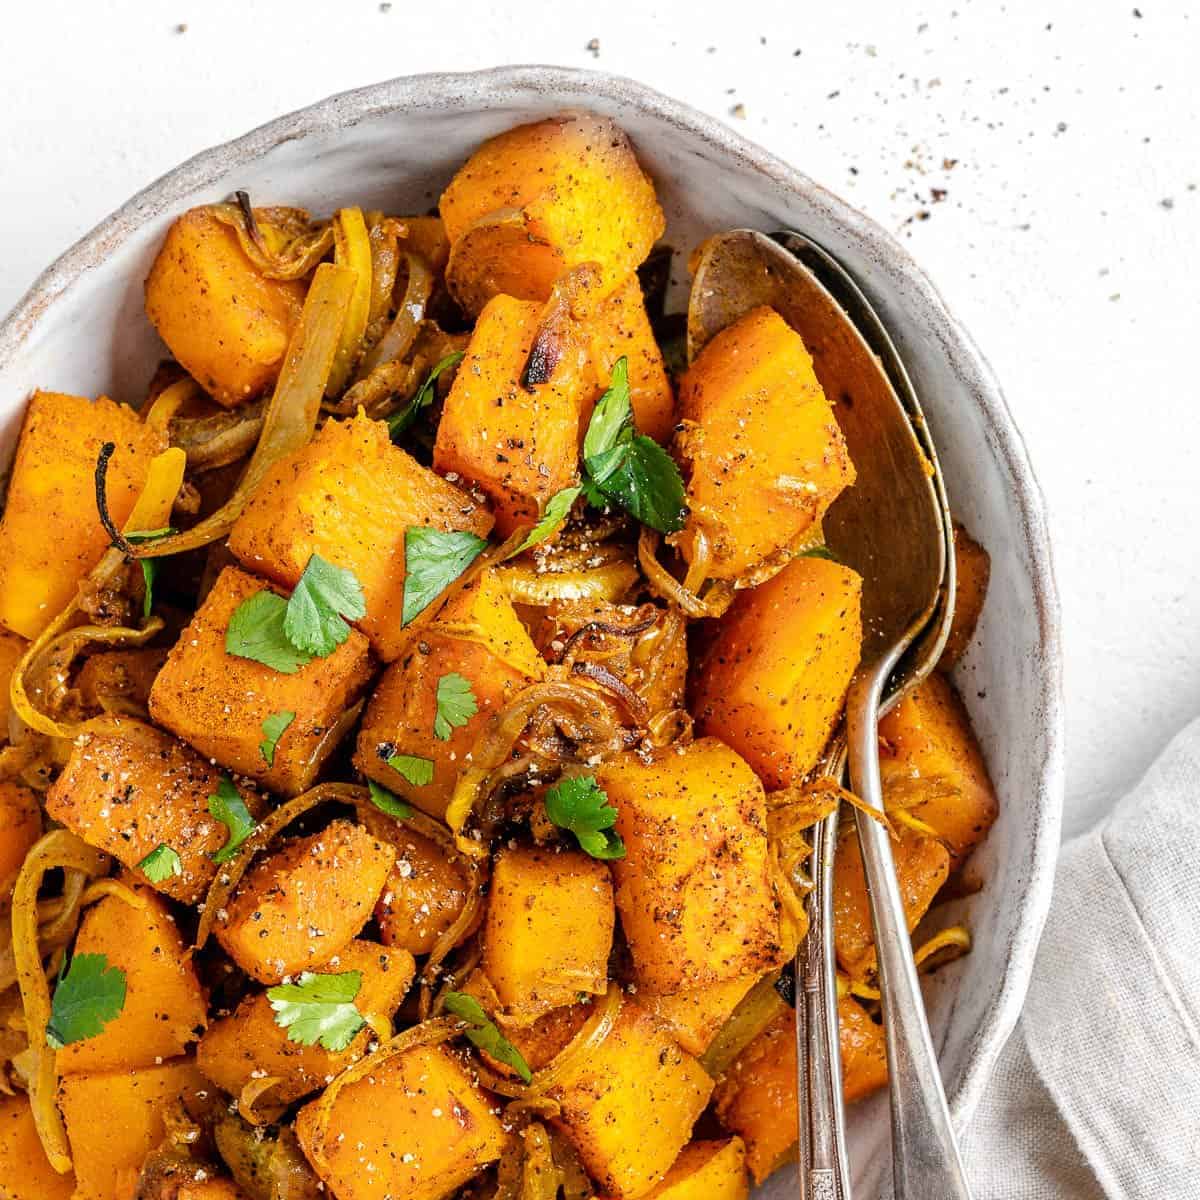 One-Skillet Roasted Butternut Squash with Spiced Chickpeas Recipe